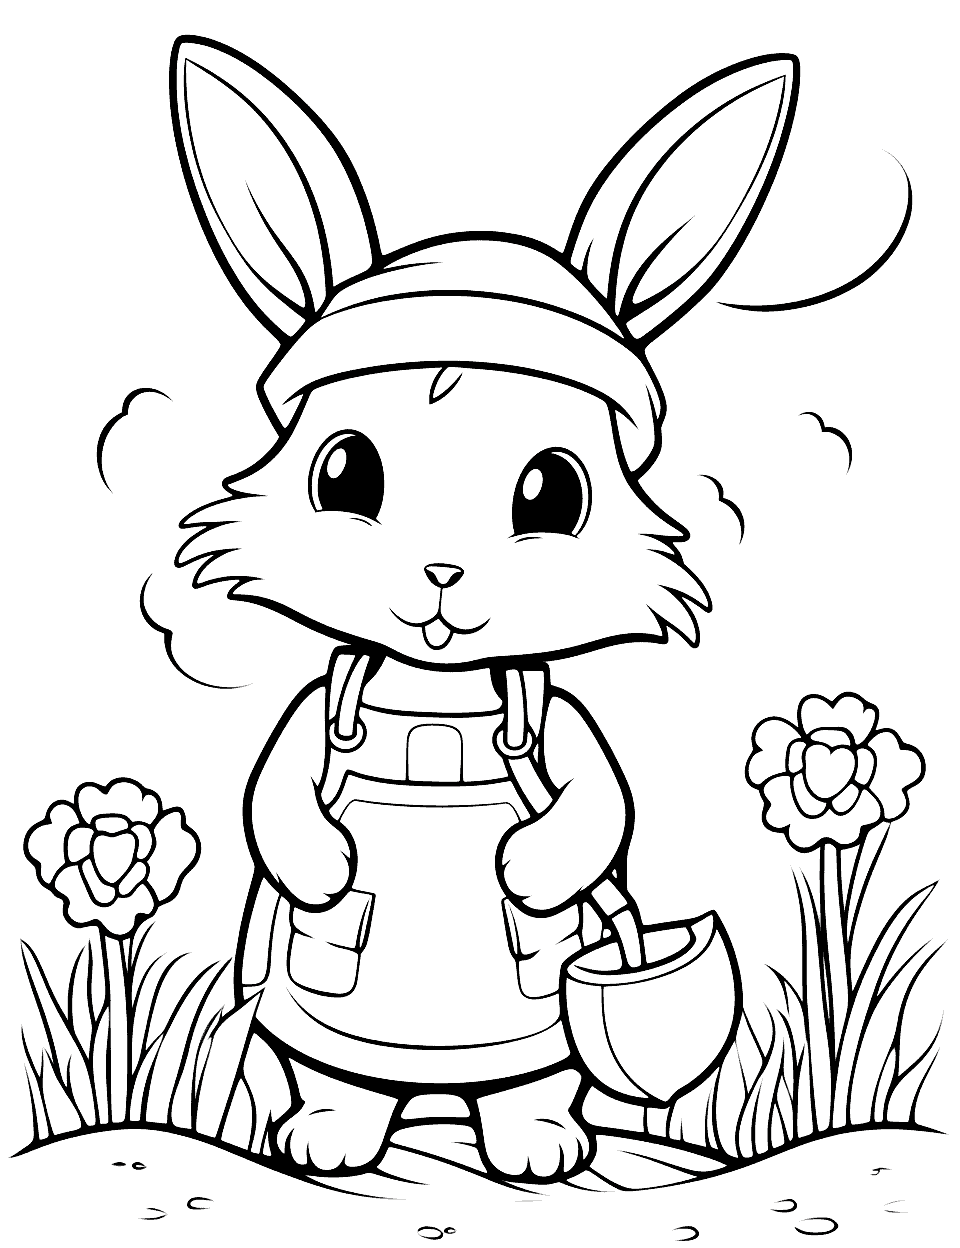 Gardening Bunny with Sunhat Coloring Page - A bunny involved in gardening, watering plants and wearing a cute sunhat.